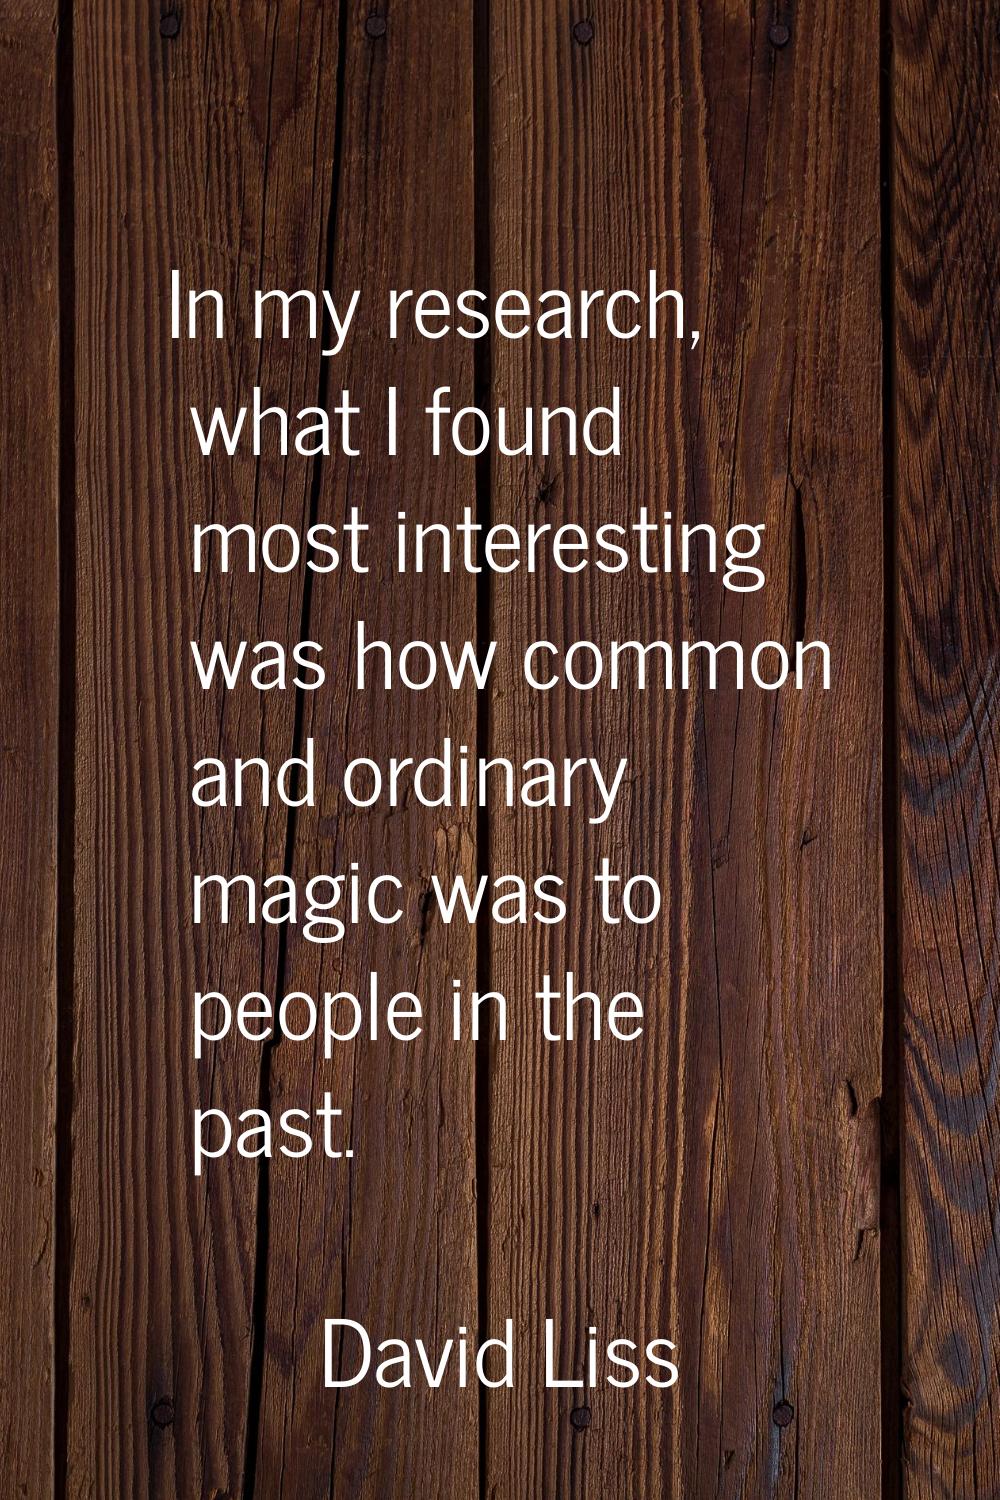 In my research, what I found most interesting was how common and ordinary magic was to people in th